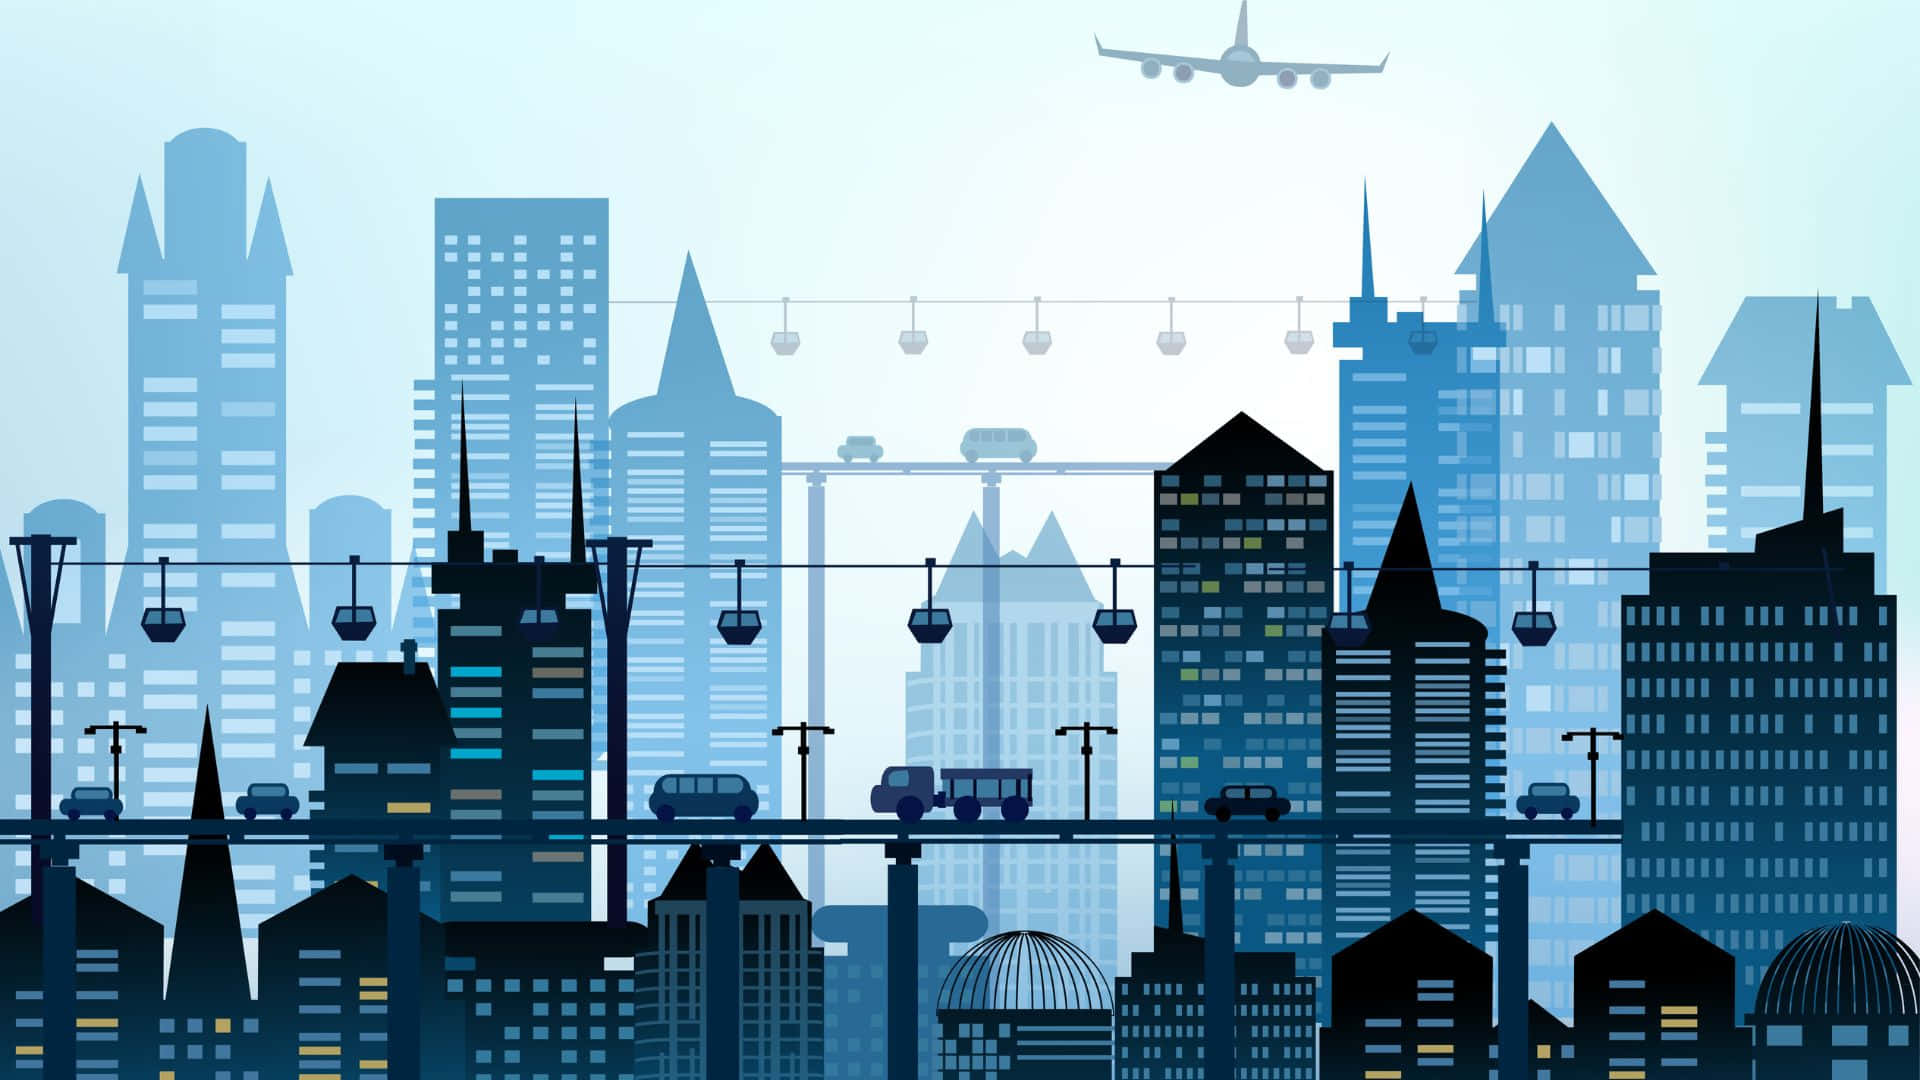 City Buildings Vector Illustration Background